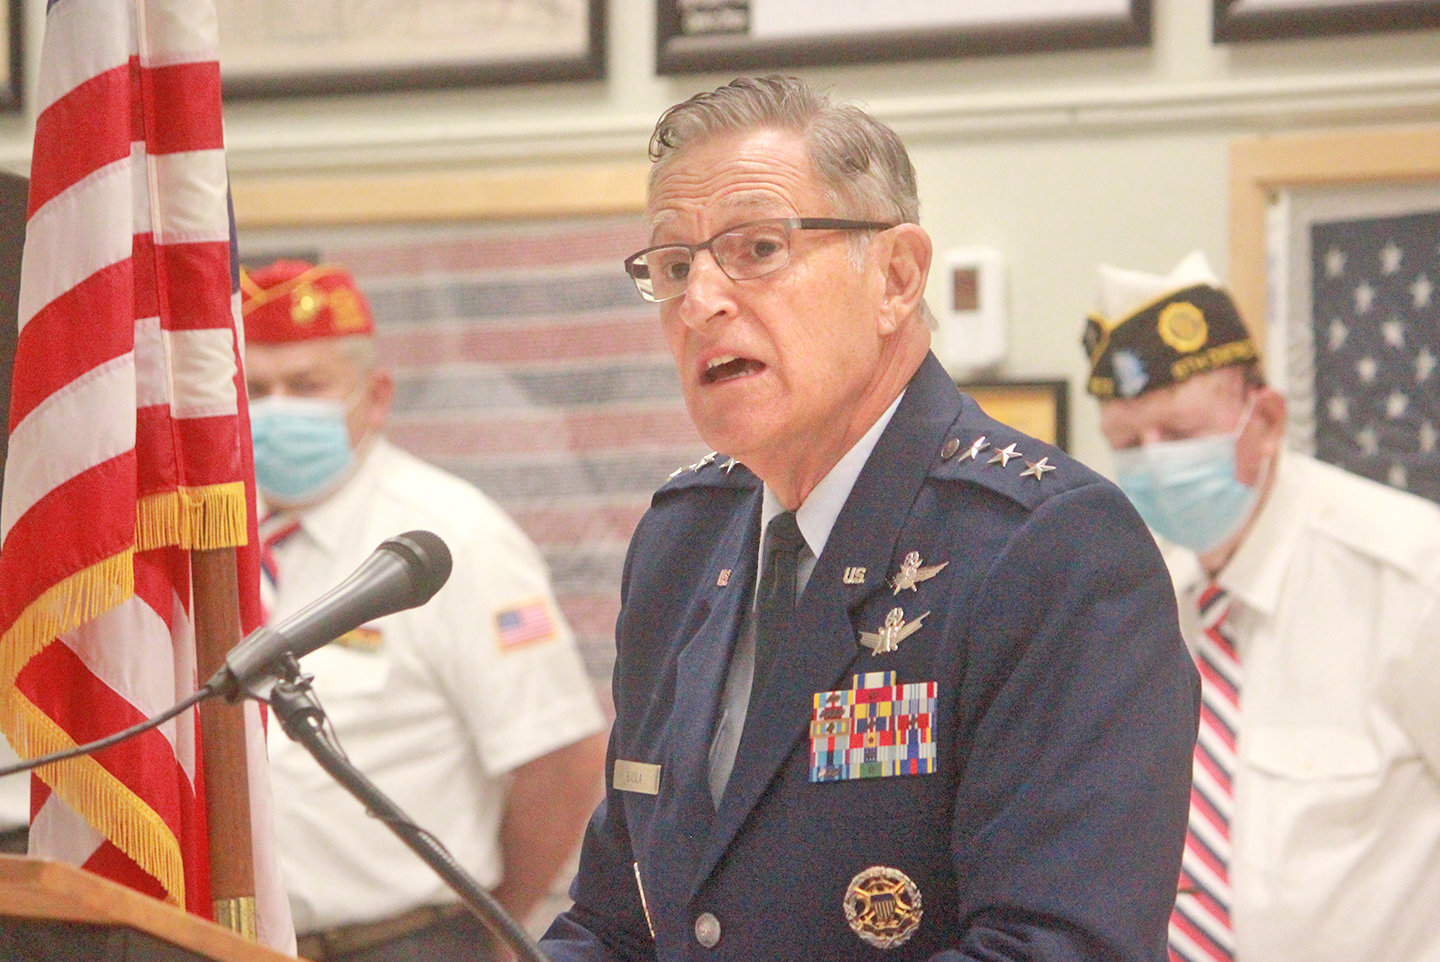 STORIES LEFT TOLD — Lt. Gen. Michael Basla speaks today at the Madison County War Veterans Memorial Committee's Veterans Day ceremony. Basla urged residents across the region to reach out to their community veterans, speak with them, learn from them, and hear their untold stories.